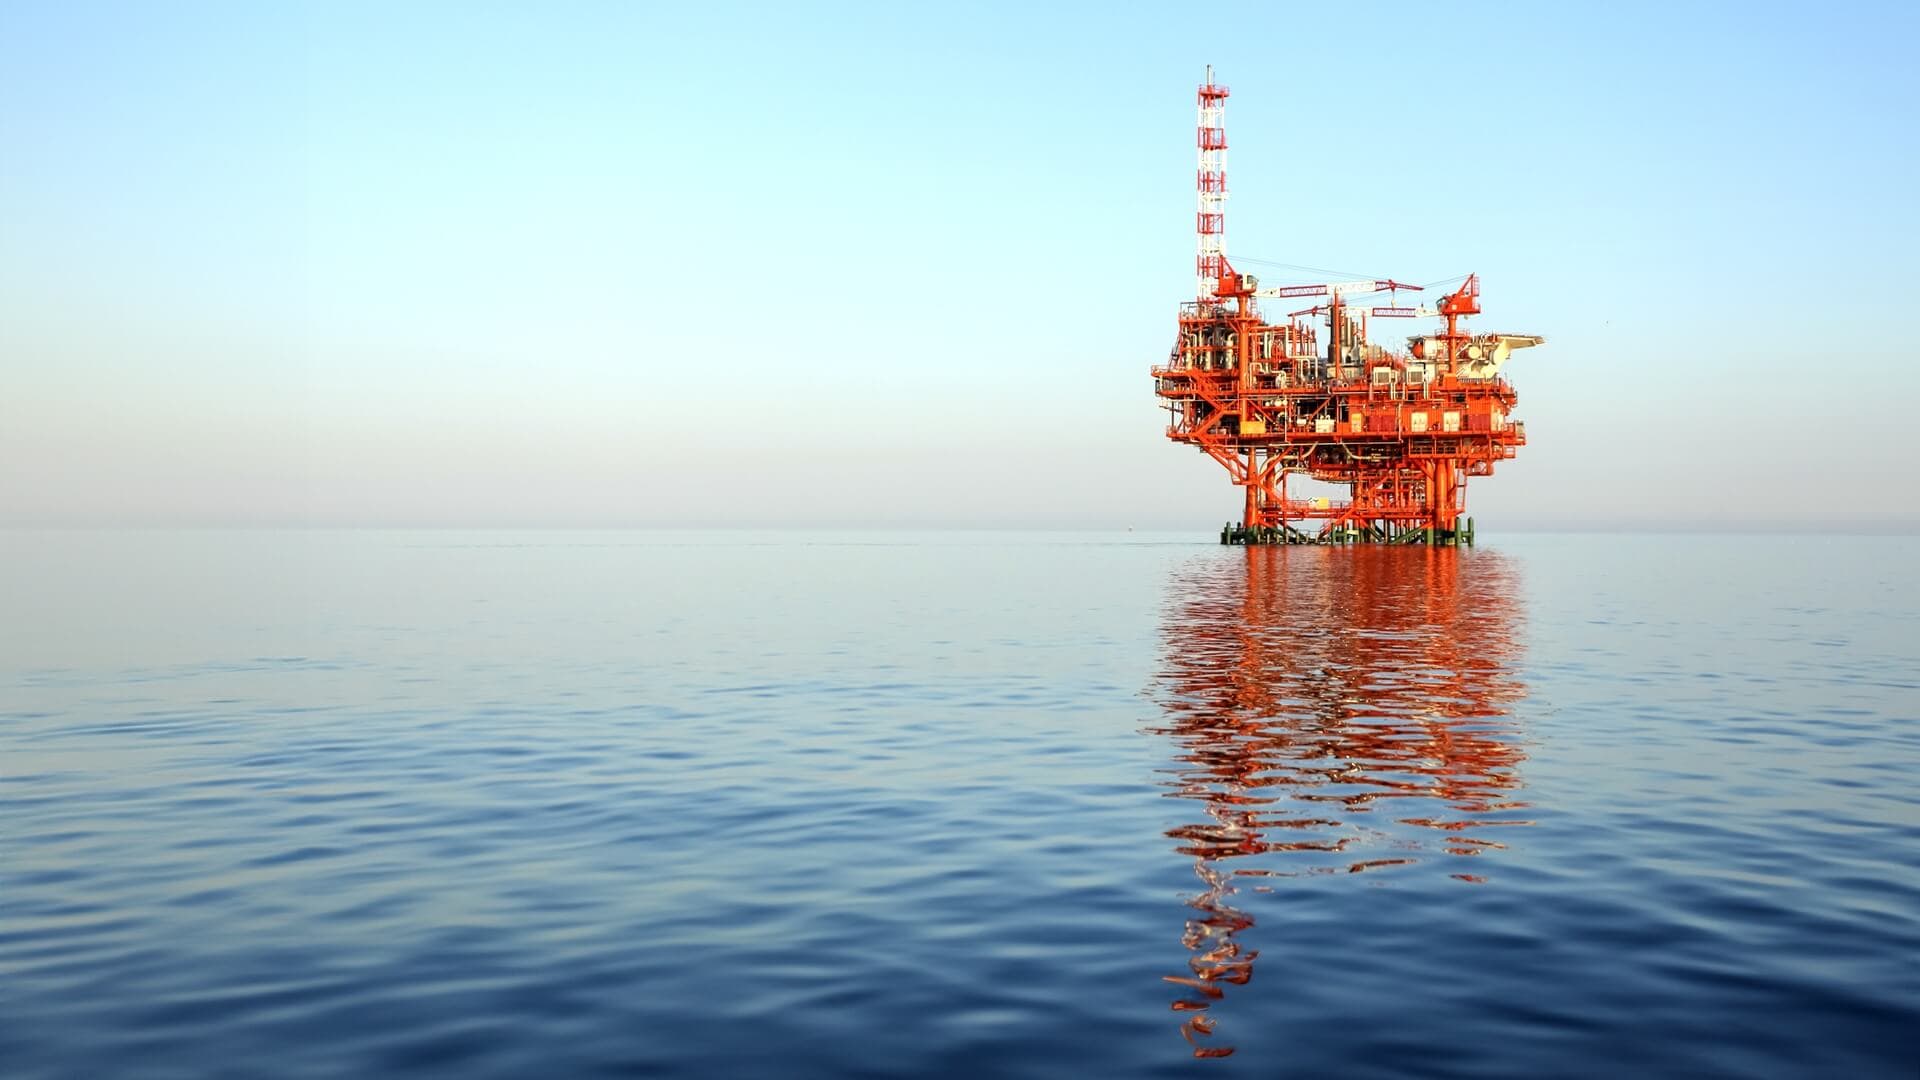 Oil, Gas, Mining and Energy industry - Offshore platform